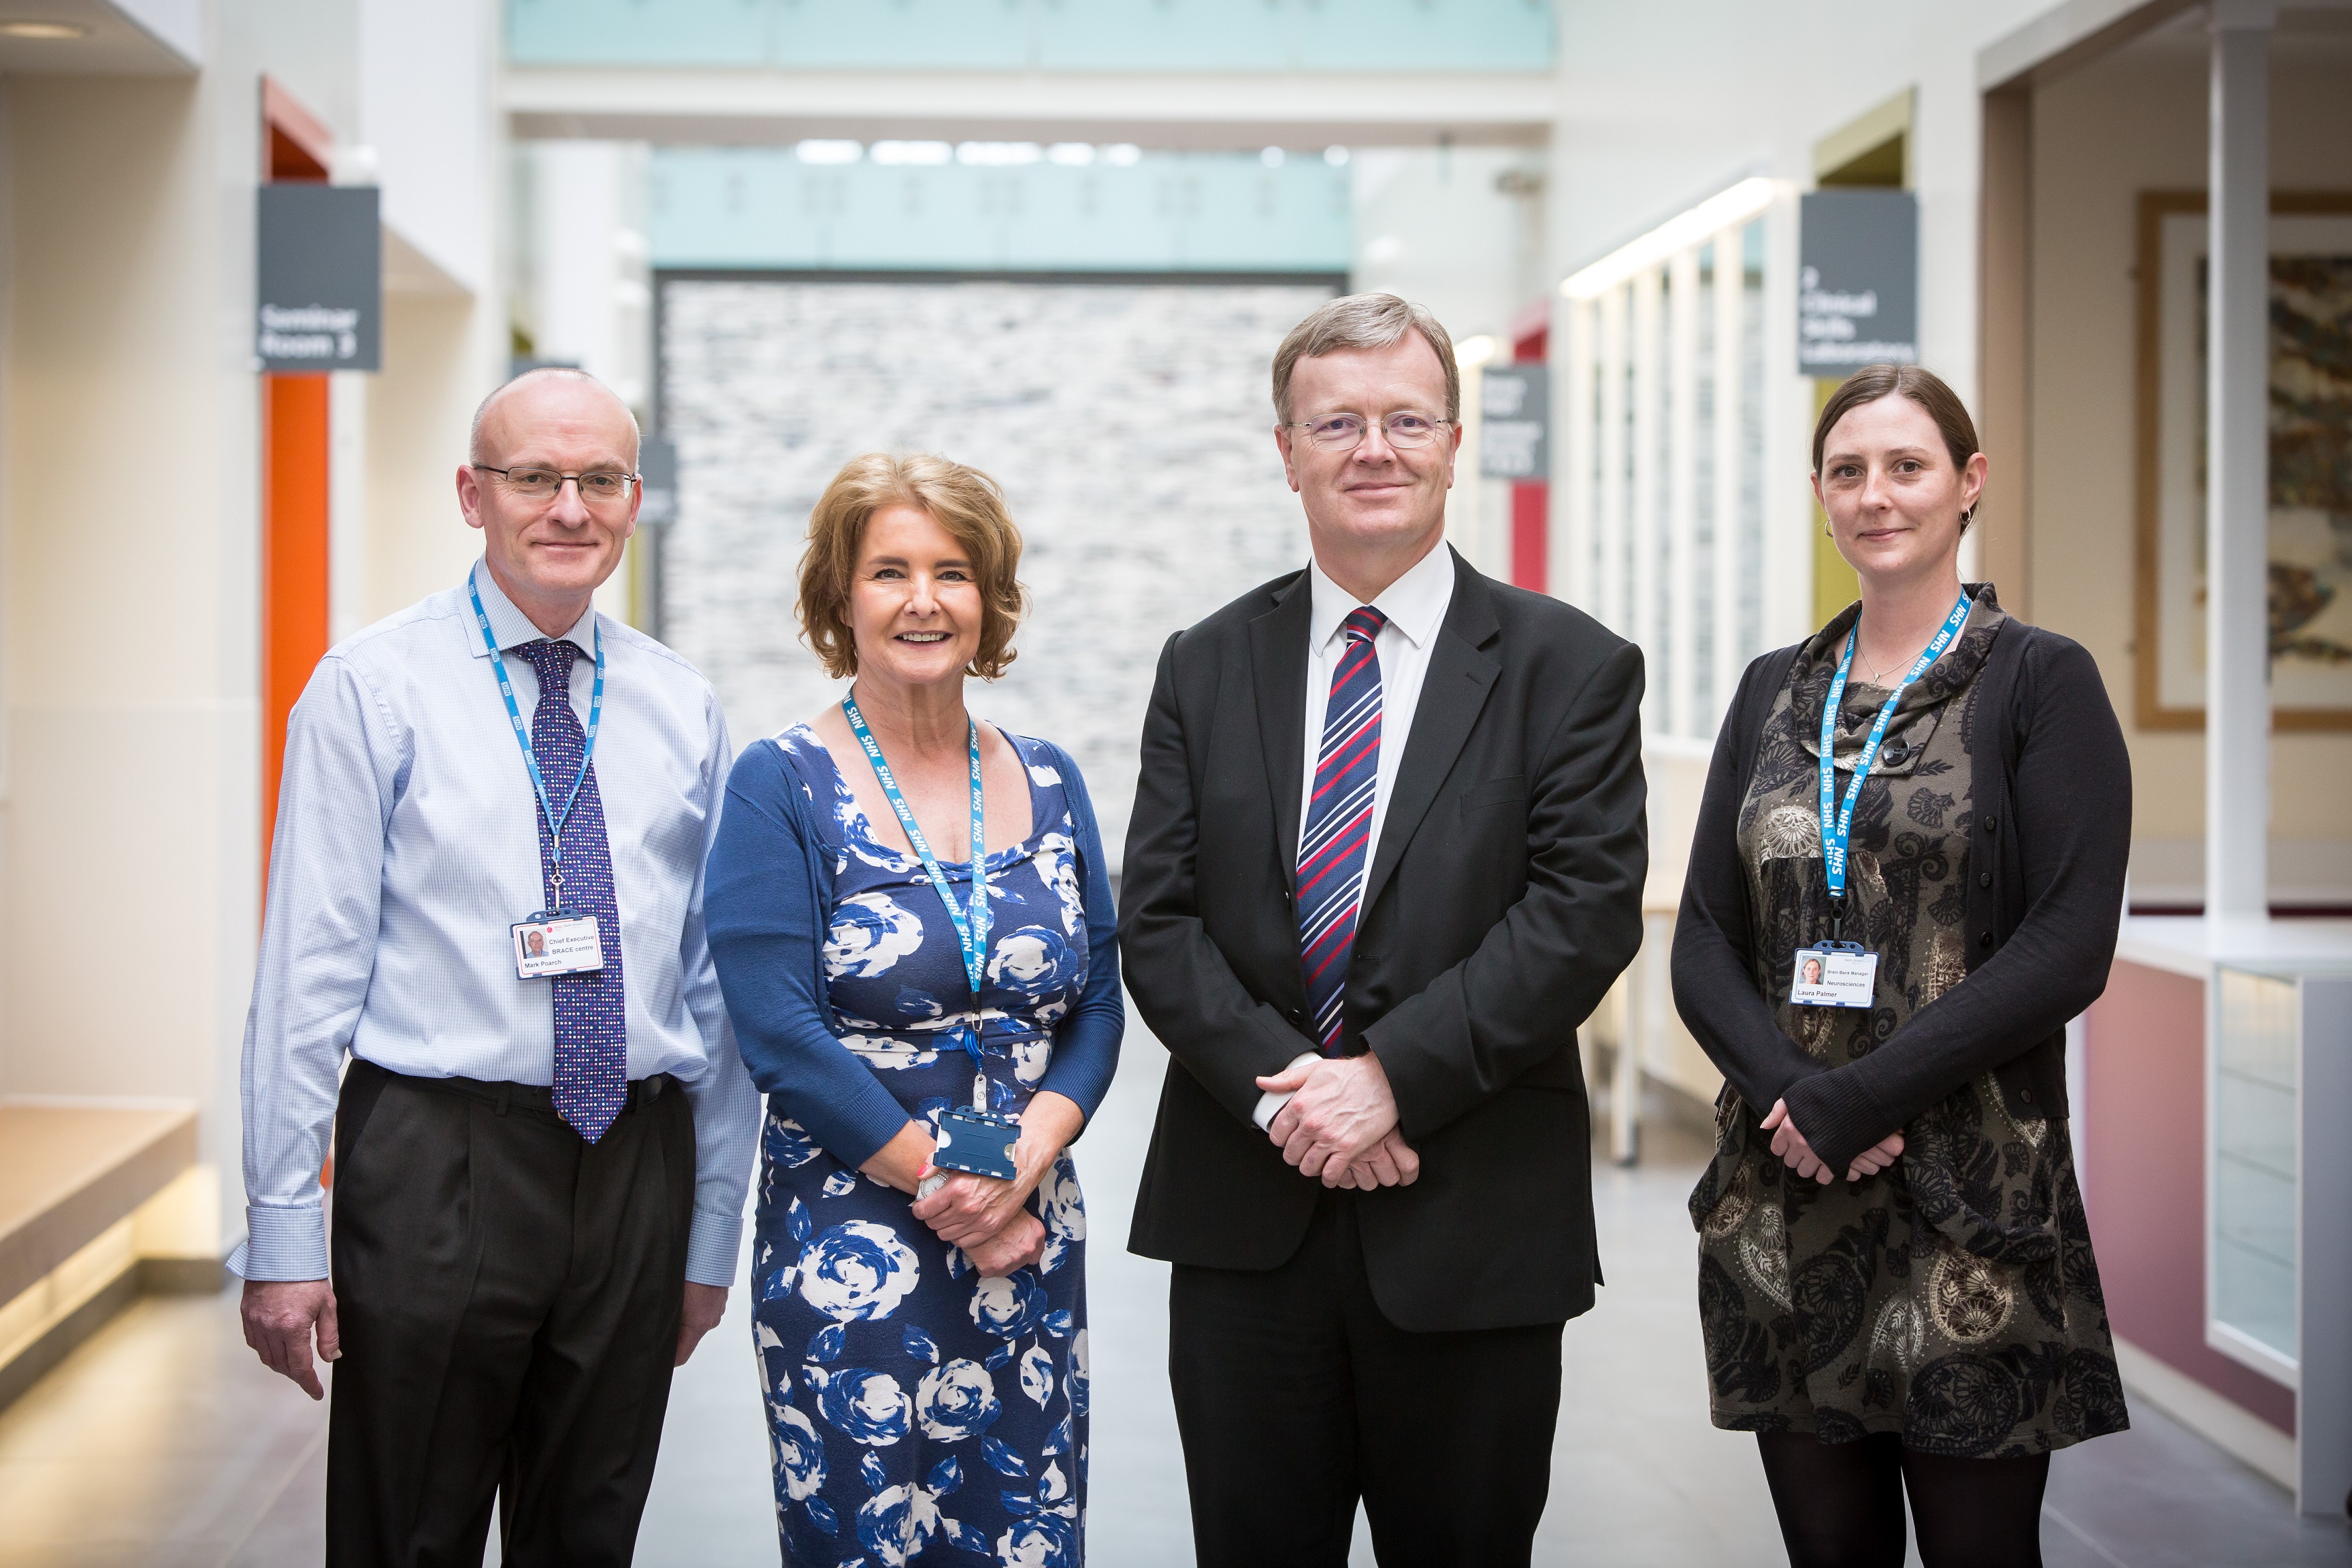 Alzheimer’s disease research funder BRACE chosen as Smith & Williamson’s charity of the year